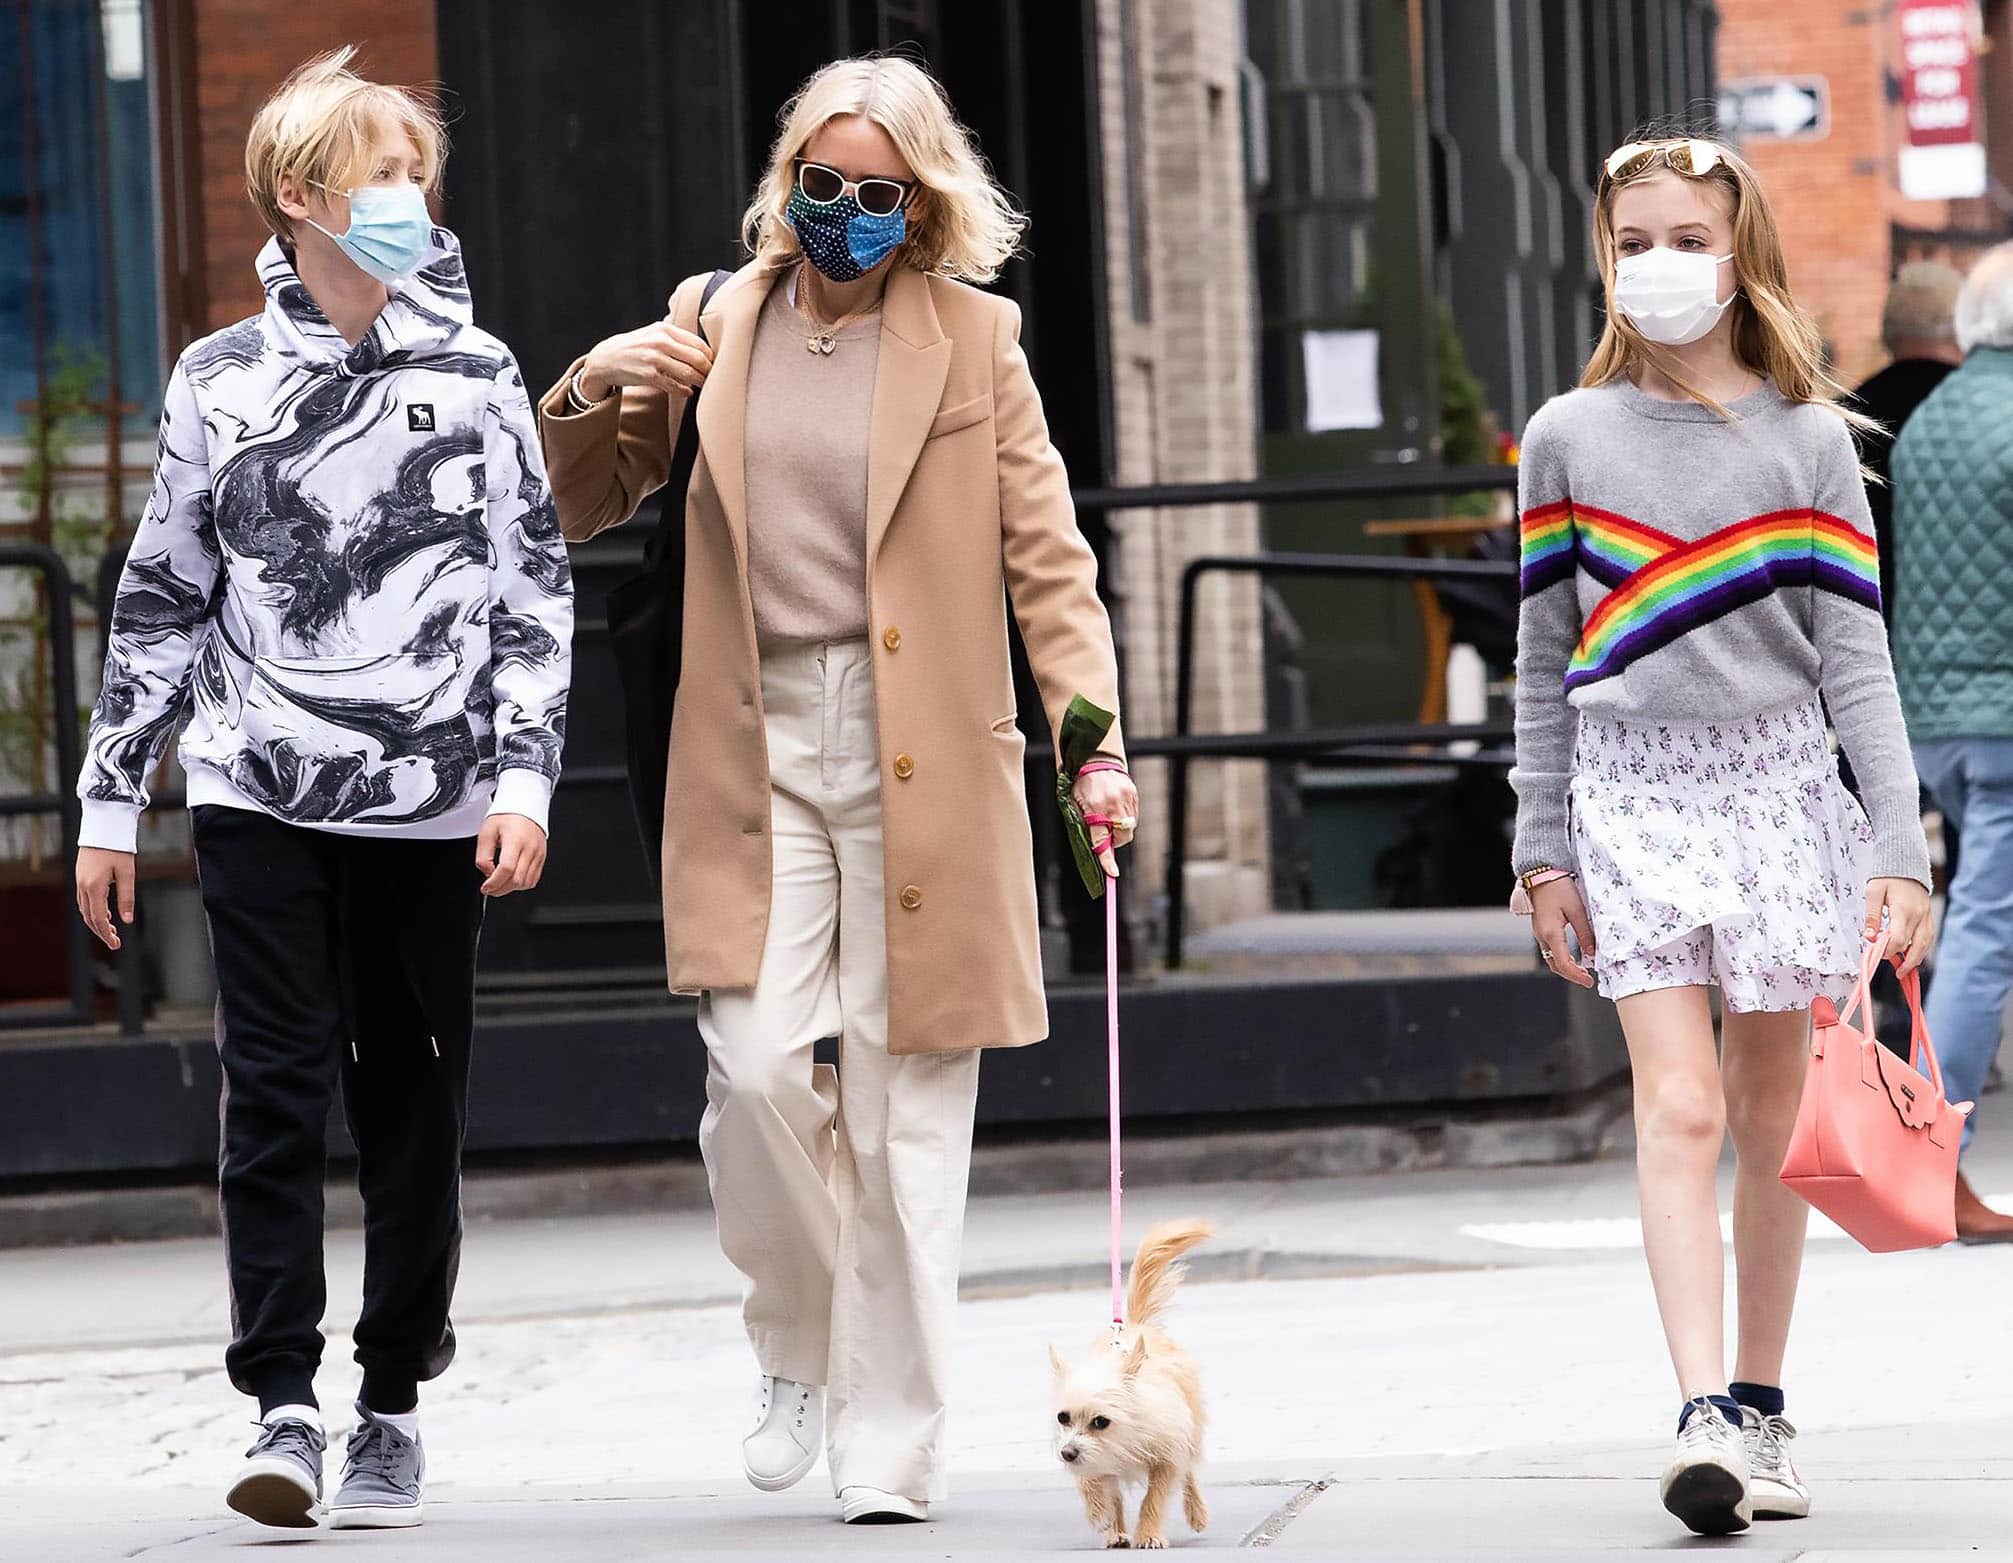 Naomi Watts, her eldest son Alexander Sasha and her youngest Samuel Kai all wearing face masks during their Mother's Day outing